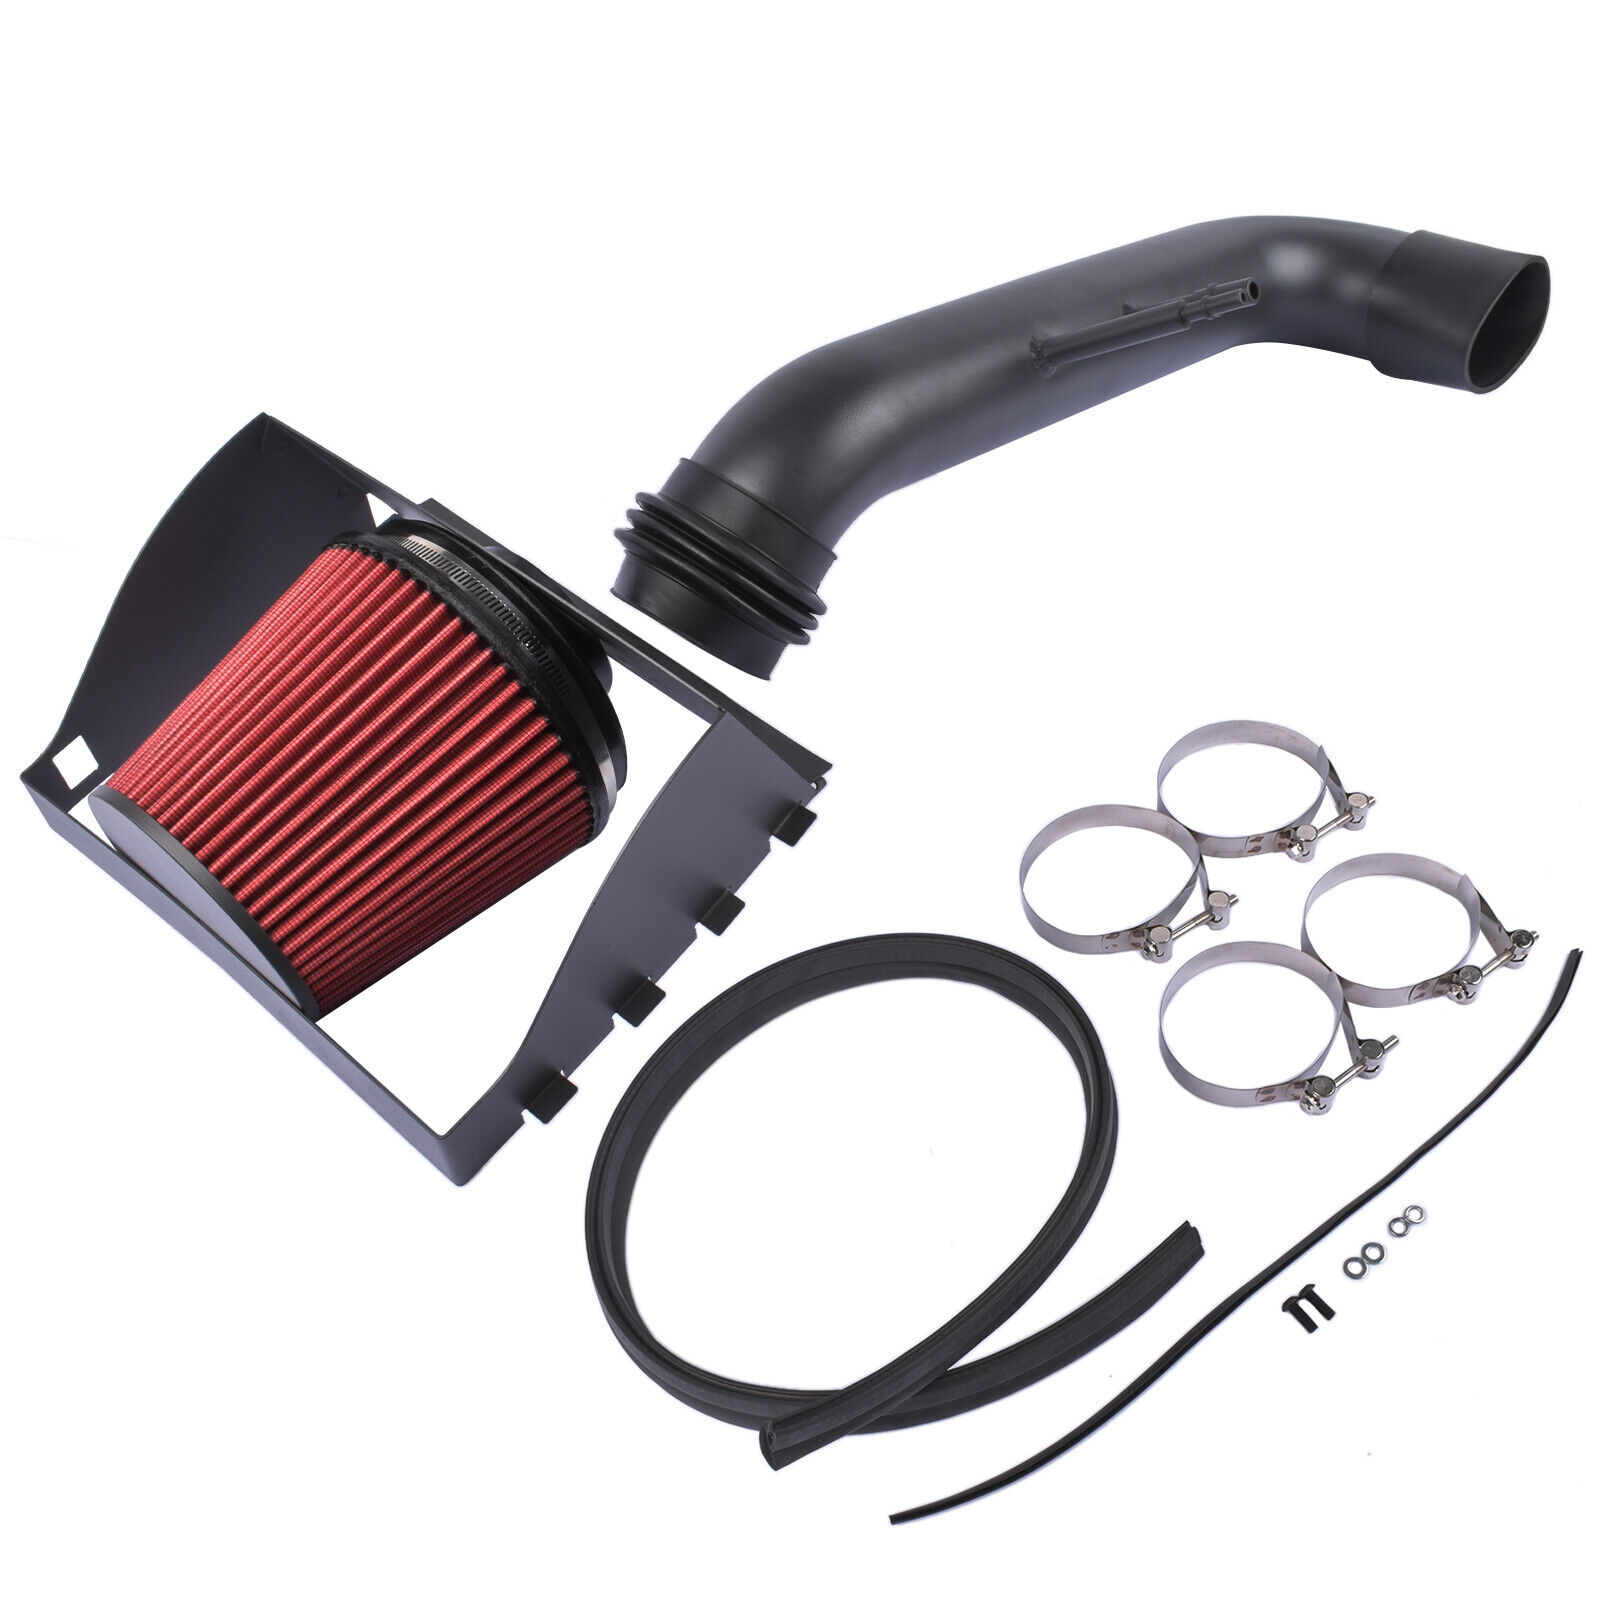 Cold Air Intake System for 2015-2020 Ford F-150 Model with 5.0L V8 Engine 10555